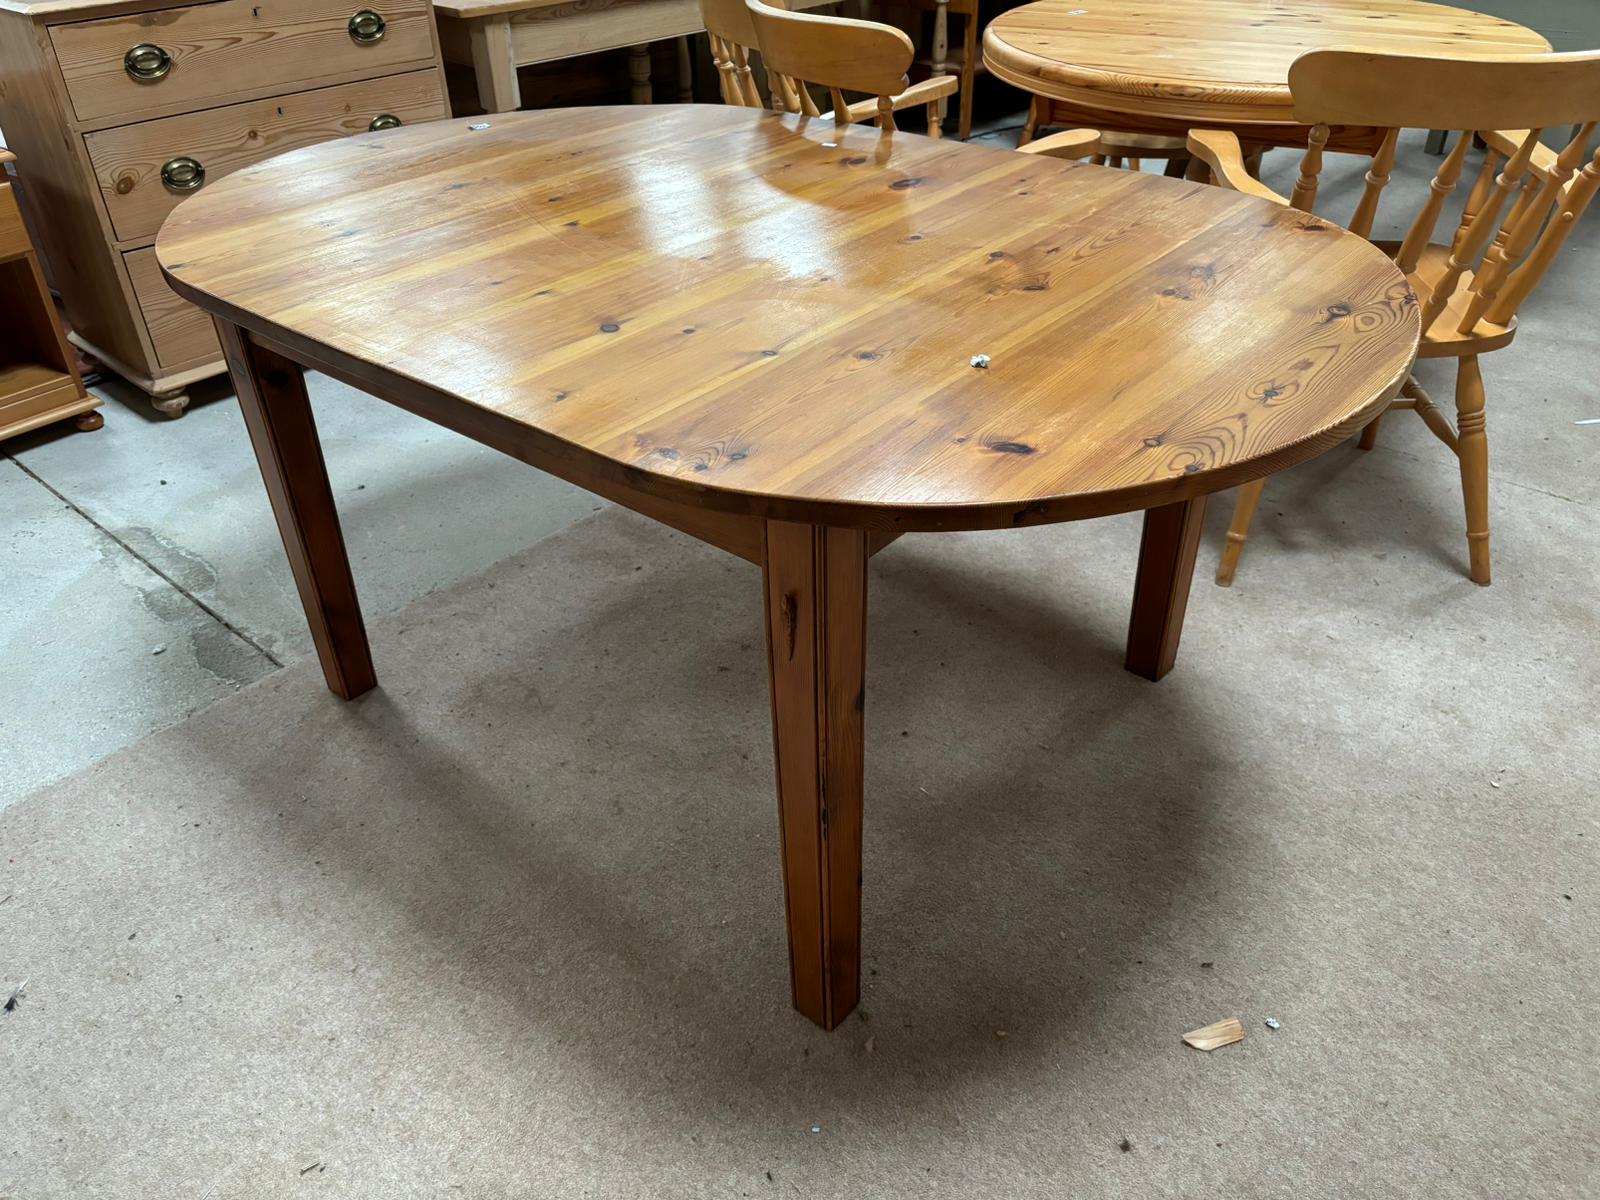 Unusual Oval Pine dining table by Lizardman - Image 3 of 3